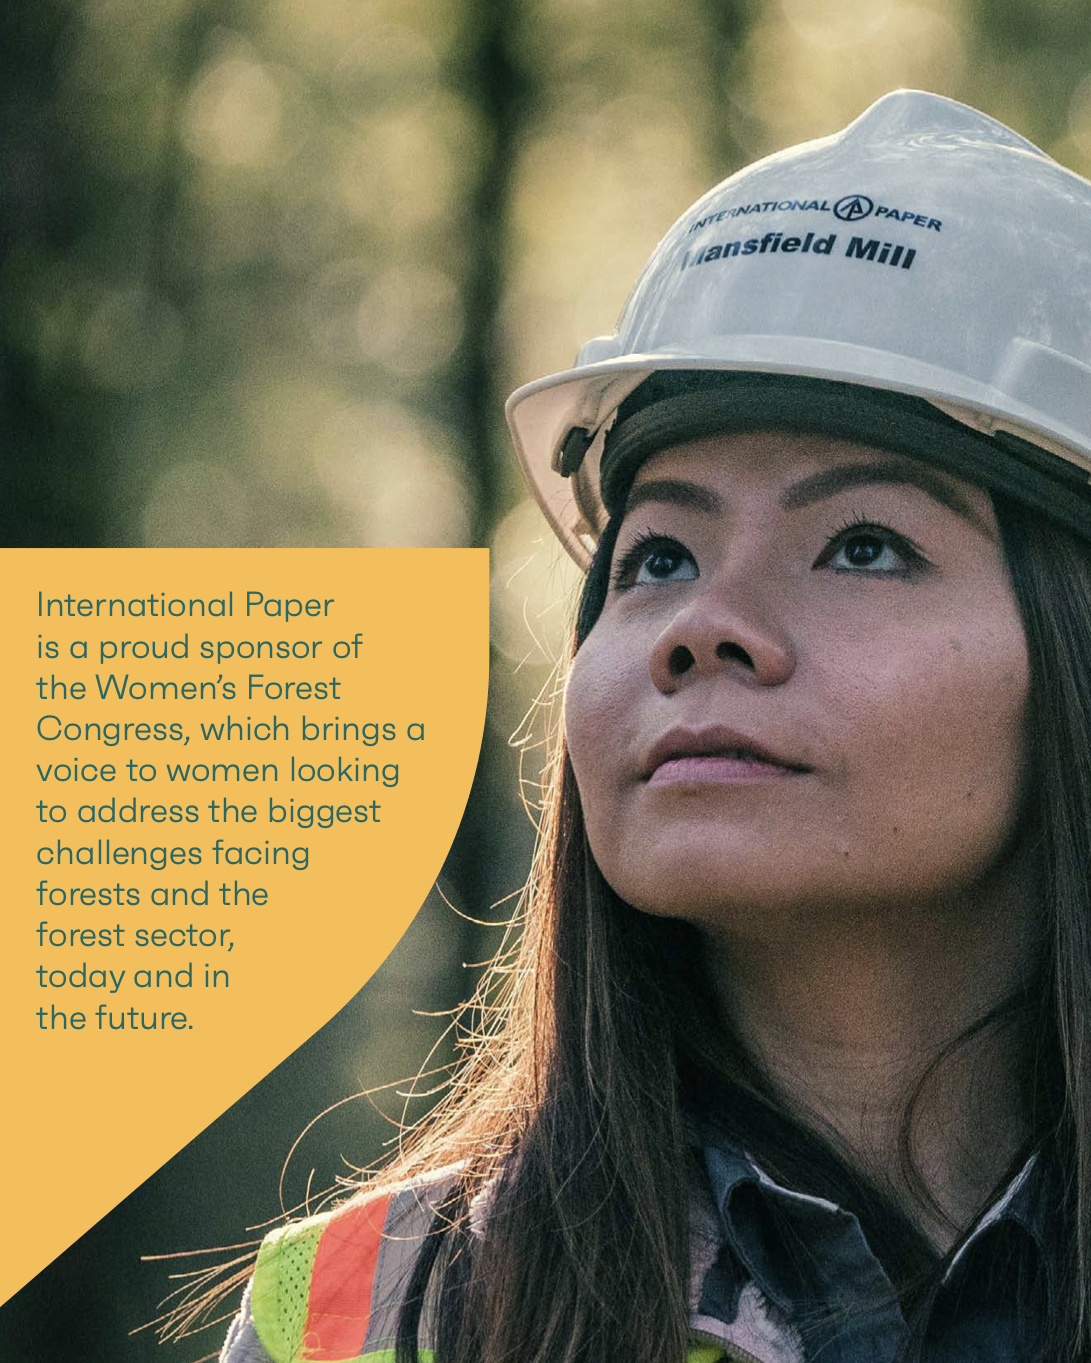 International Paper is a proud sponsor of the Women’s Forest Congress, which brings a voice to women looking to address the biggest challenges facing forests and the forest sector, today and in the future.